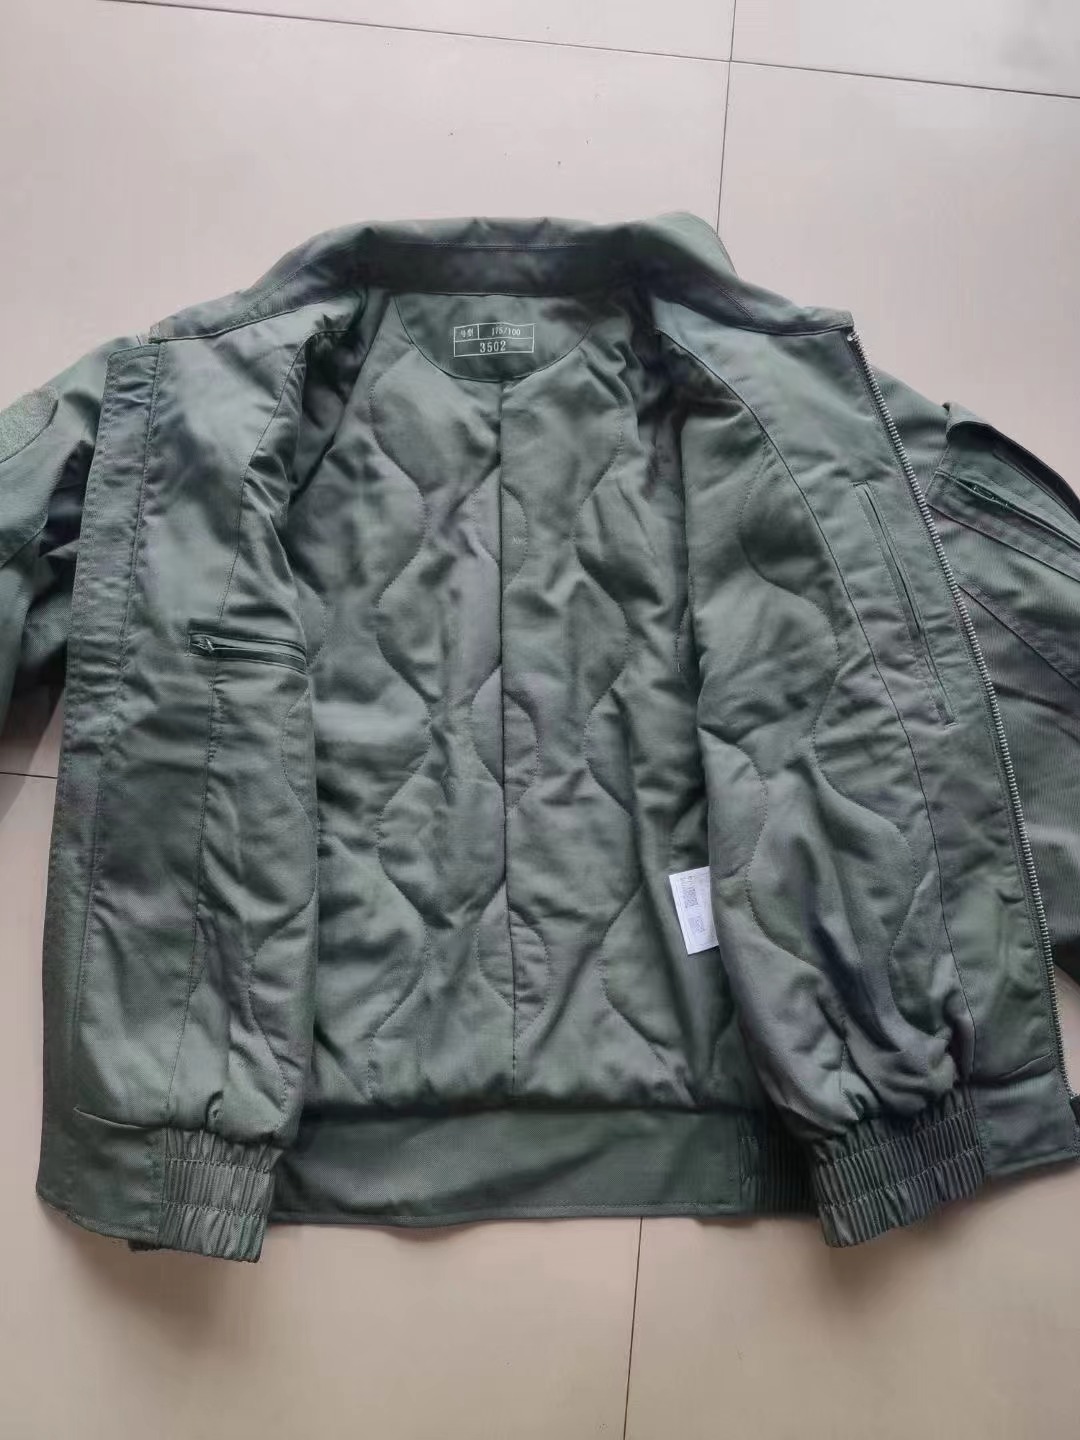 China PLA Air Force flight jacket from 2021 | Vintage Leather Jackets Forum